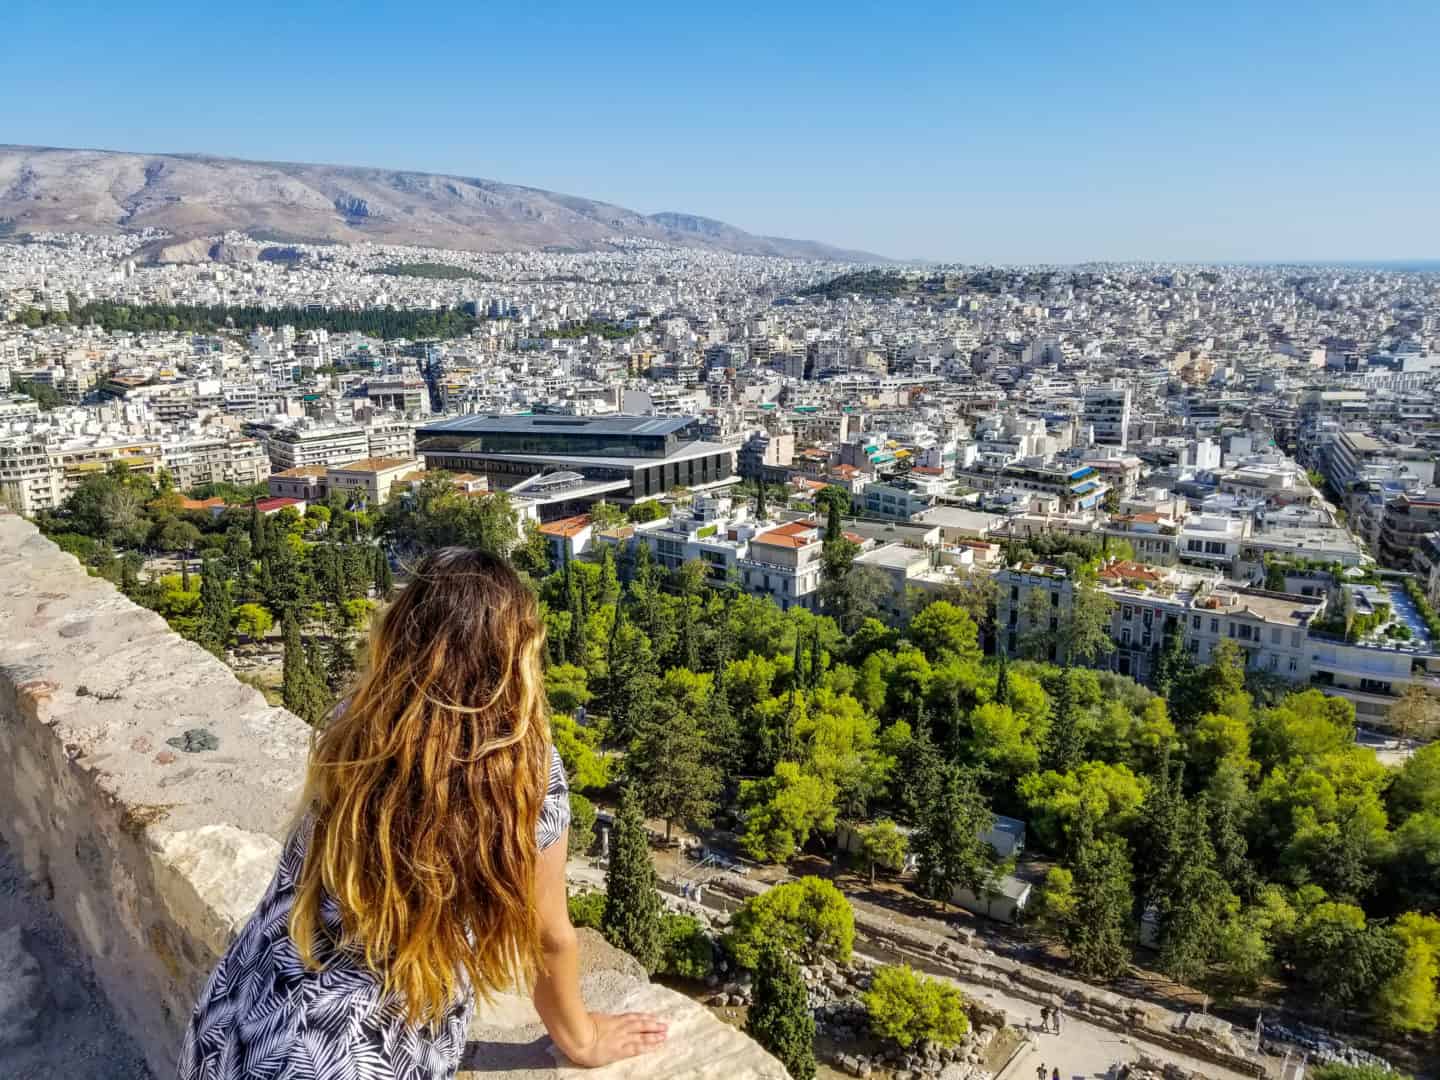 Views from the Acropolis